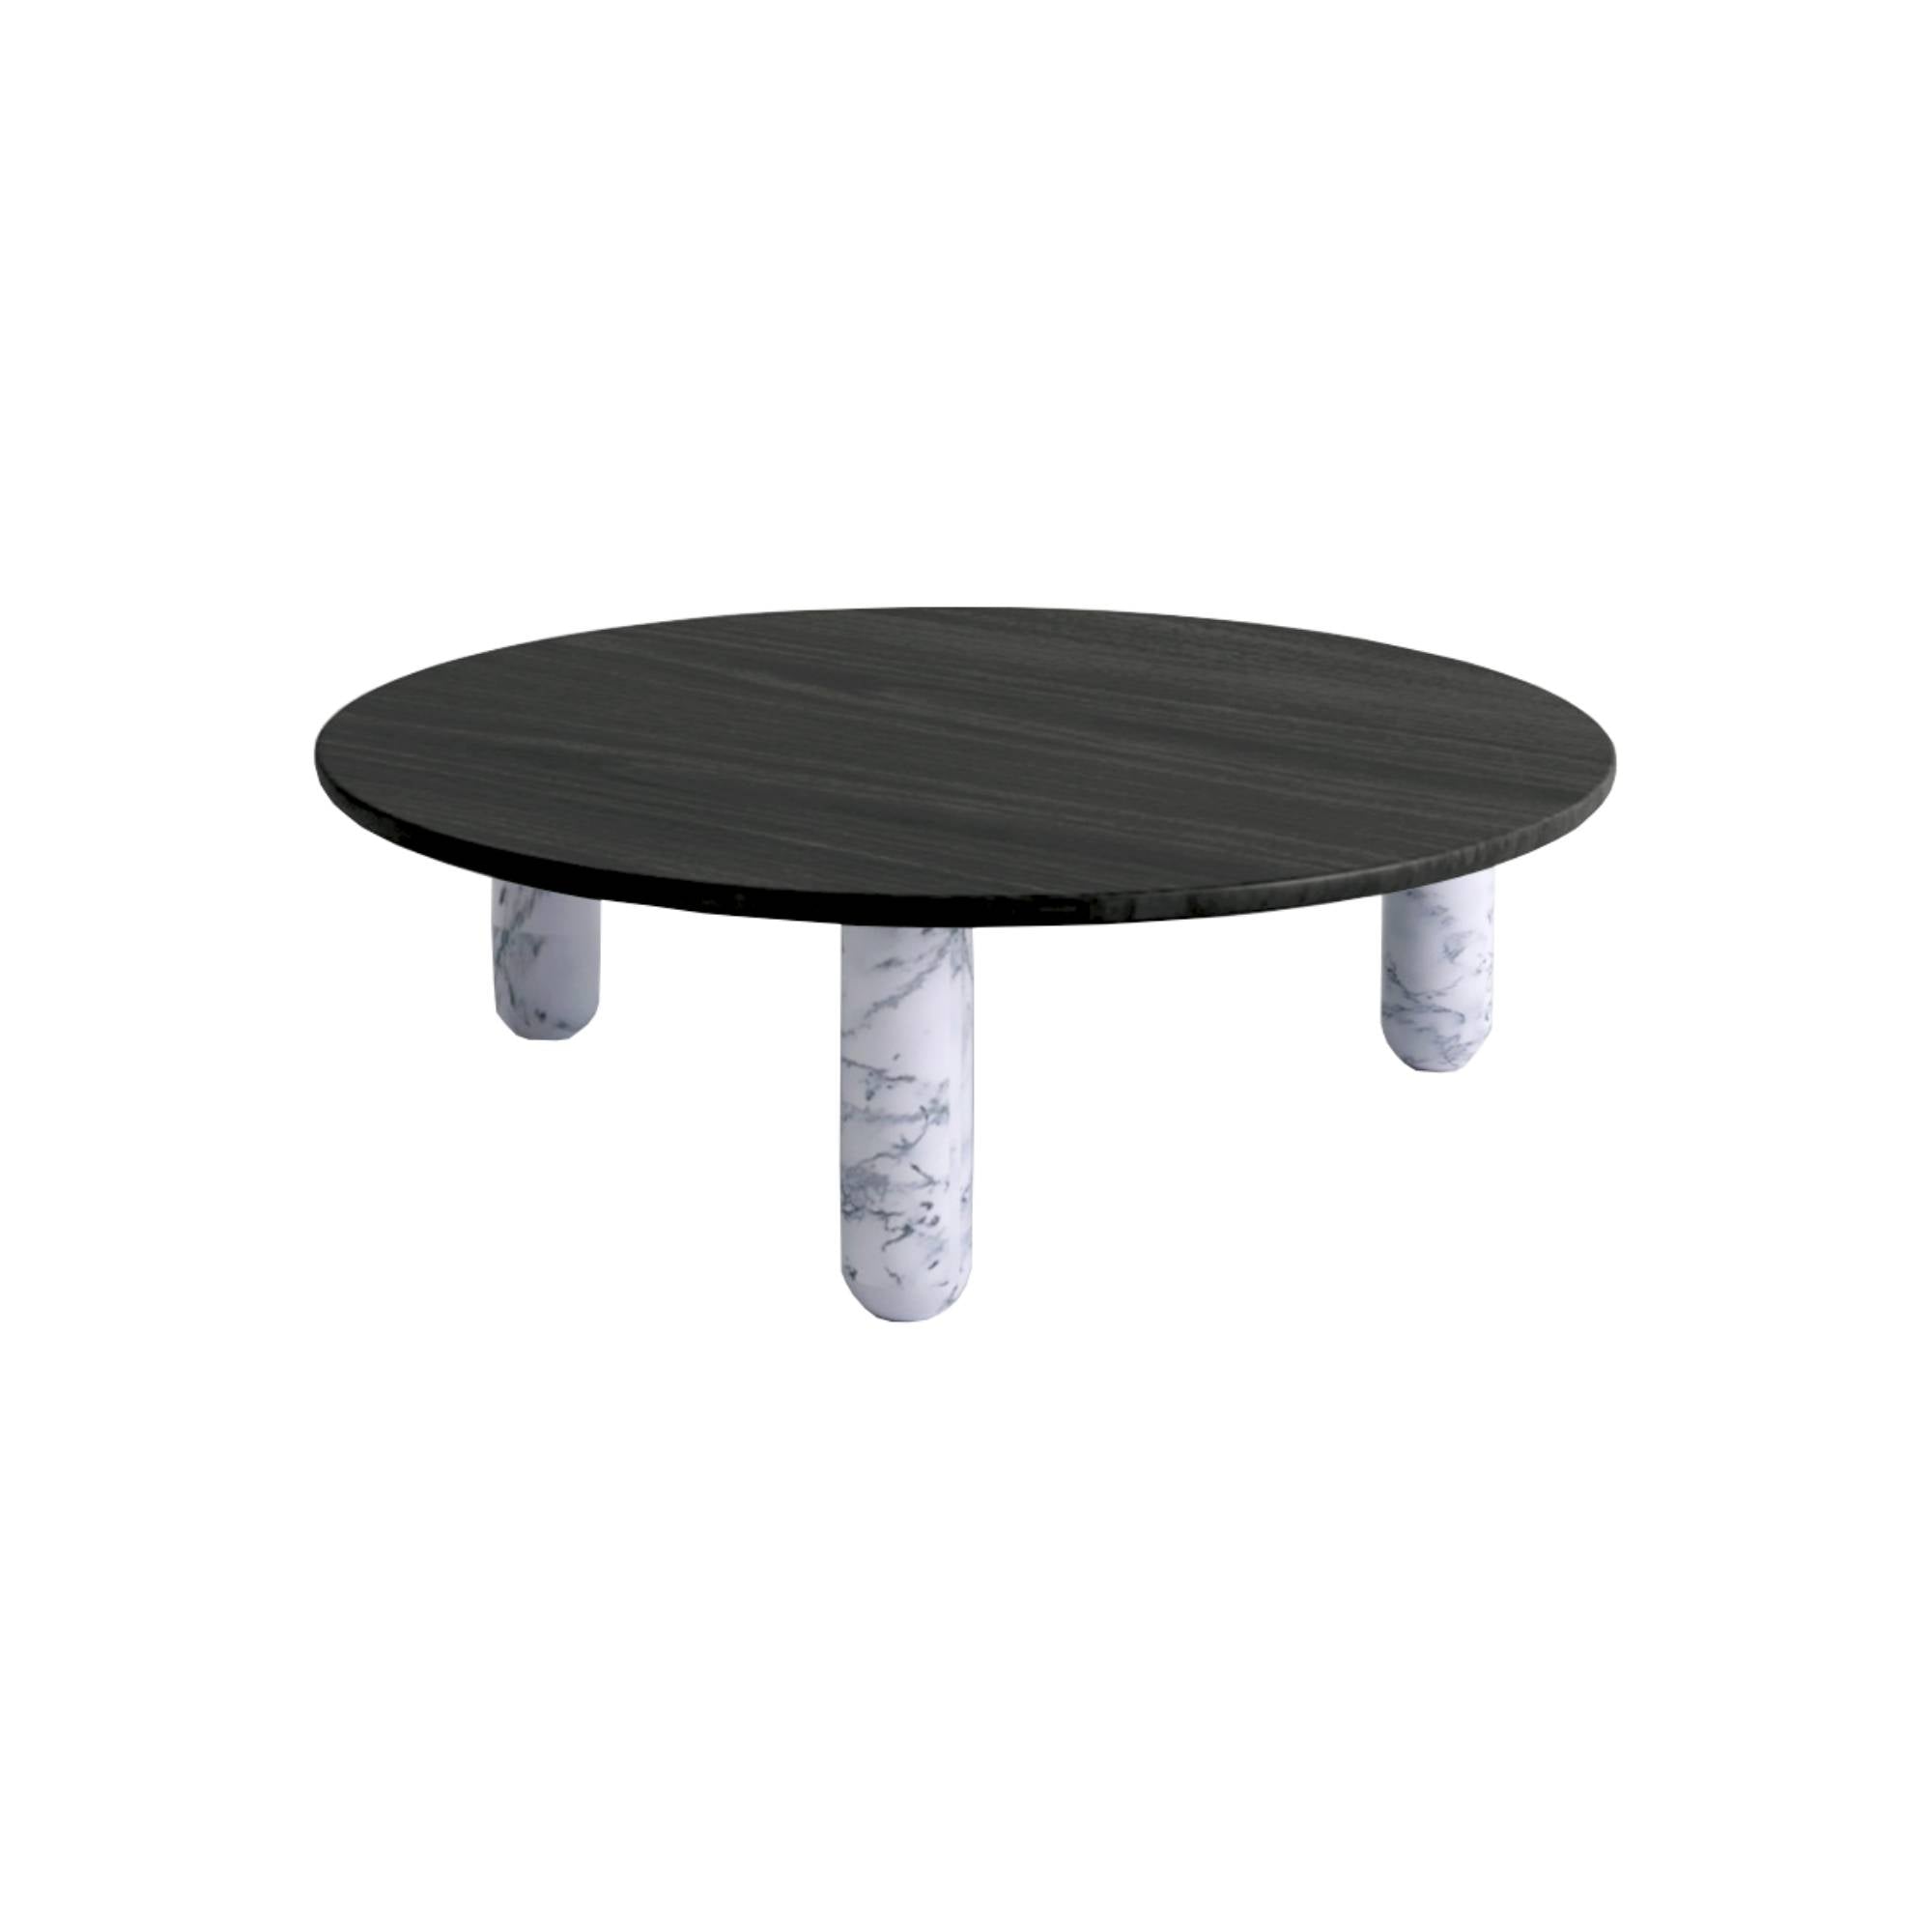 Sunday Coffee Table: Round + White Pele de Tigre Marble + Black Stained Wood